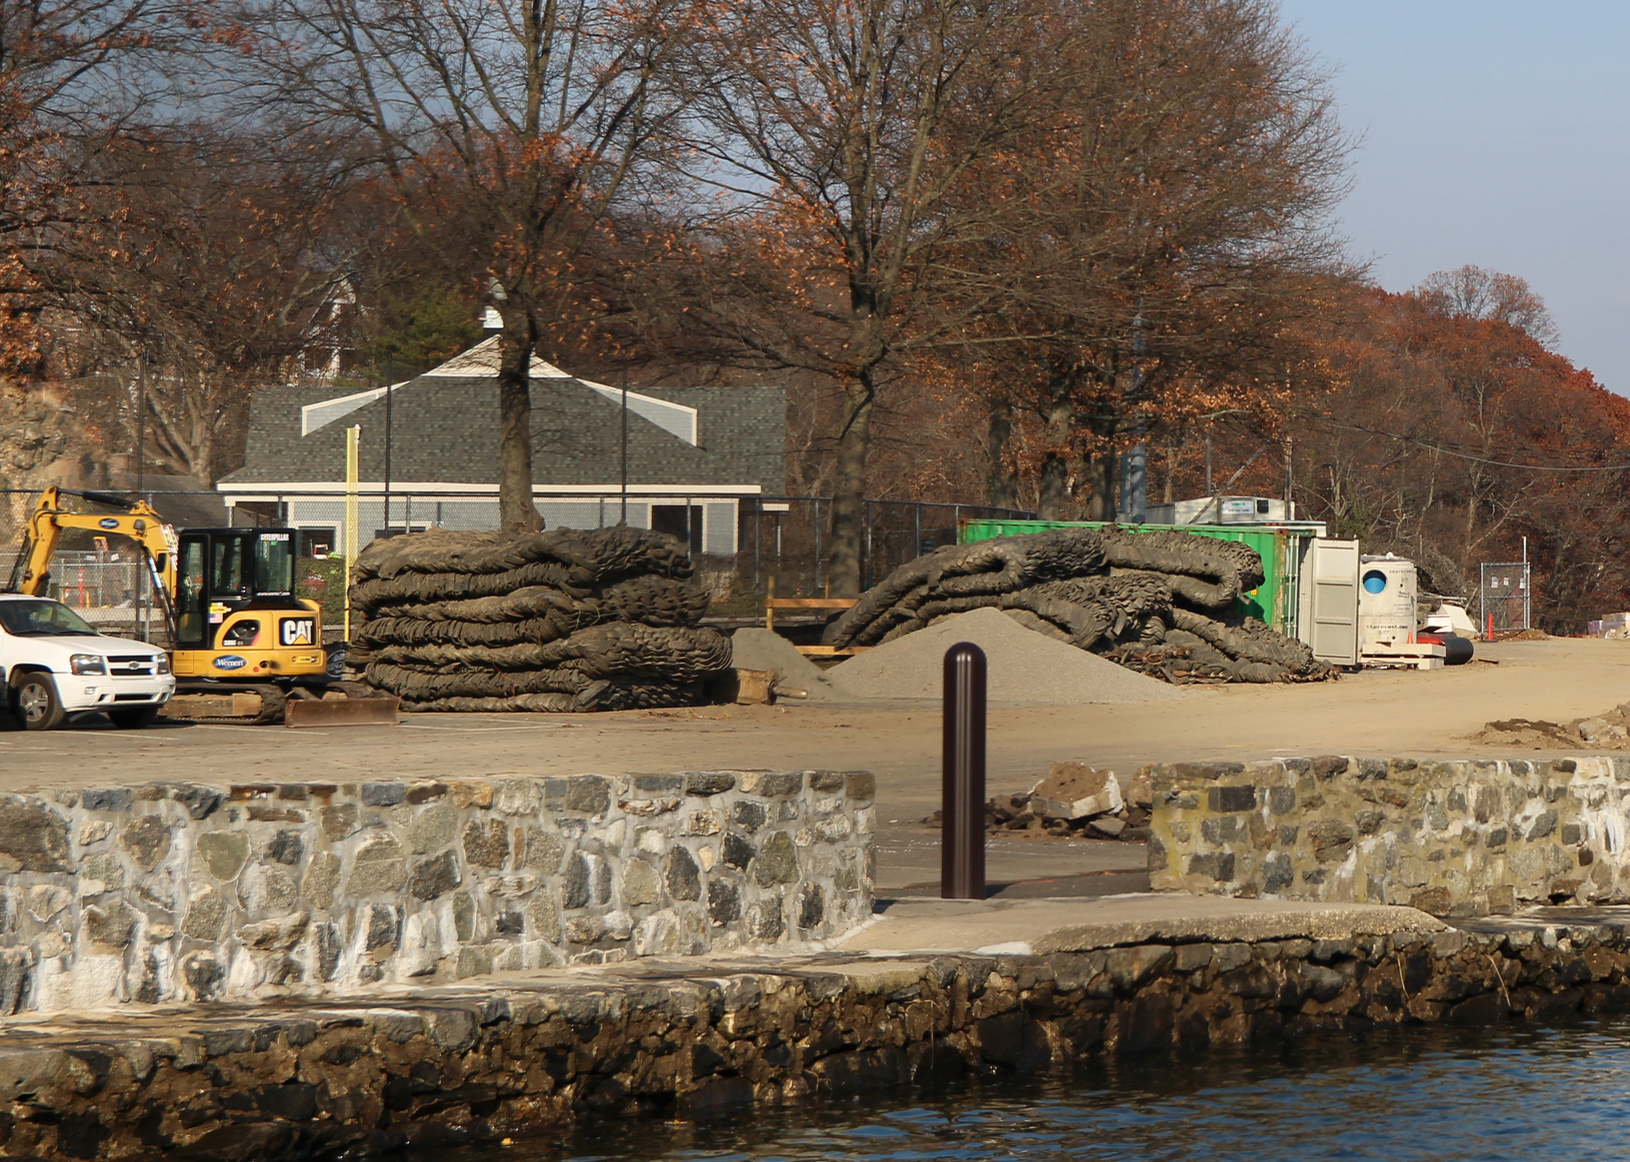 View from marina of the new building (left) for the Byram Pool, and parking lot adjacent to pool and beach, which is currently closed. Dec 4, 2017 Photo: Leslie Yager